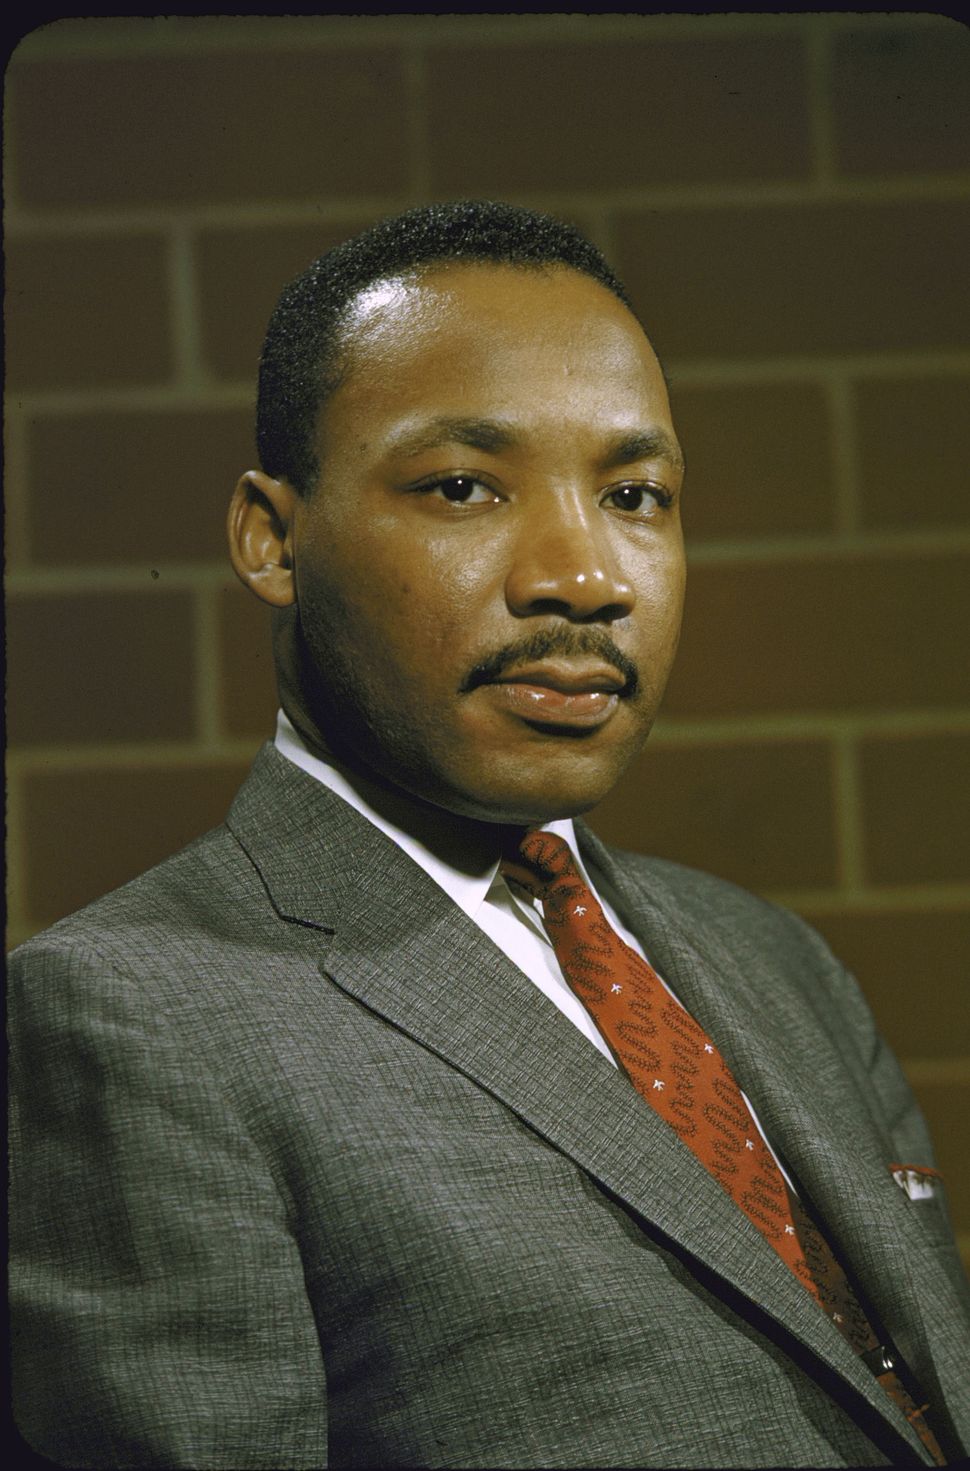 biography of martin luther king jr in english